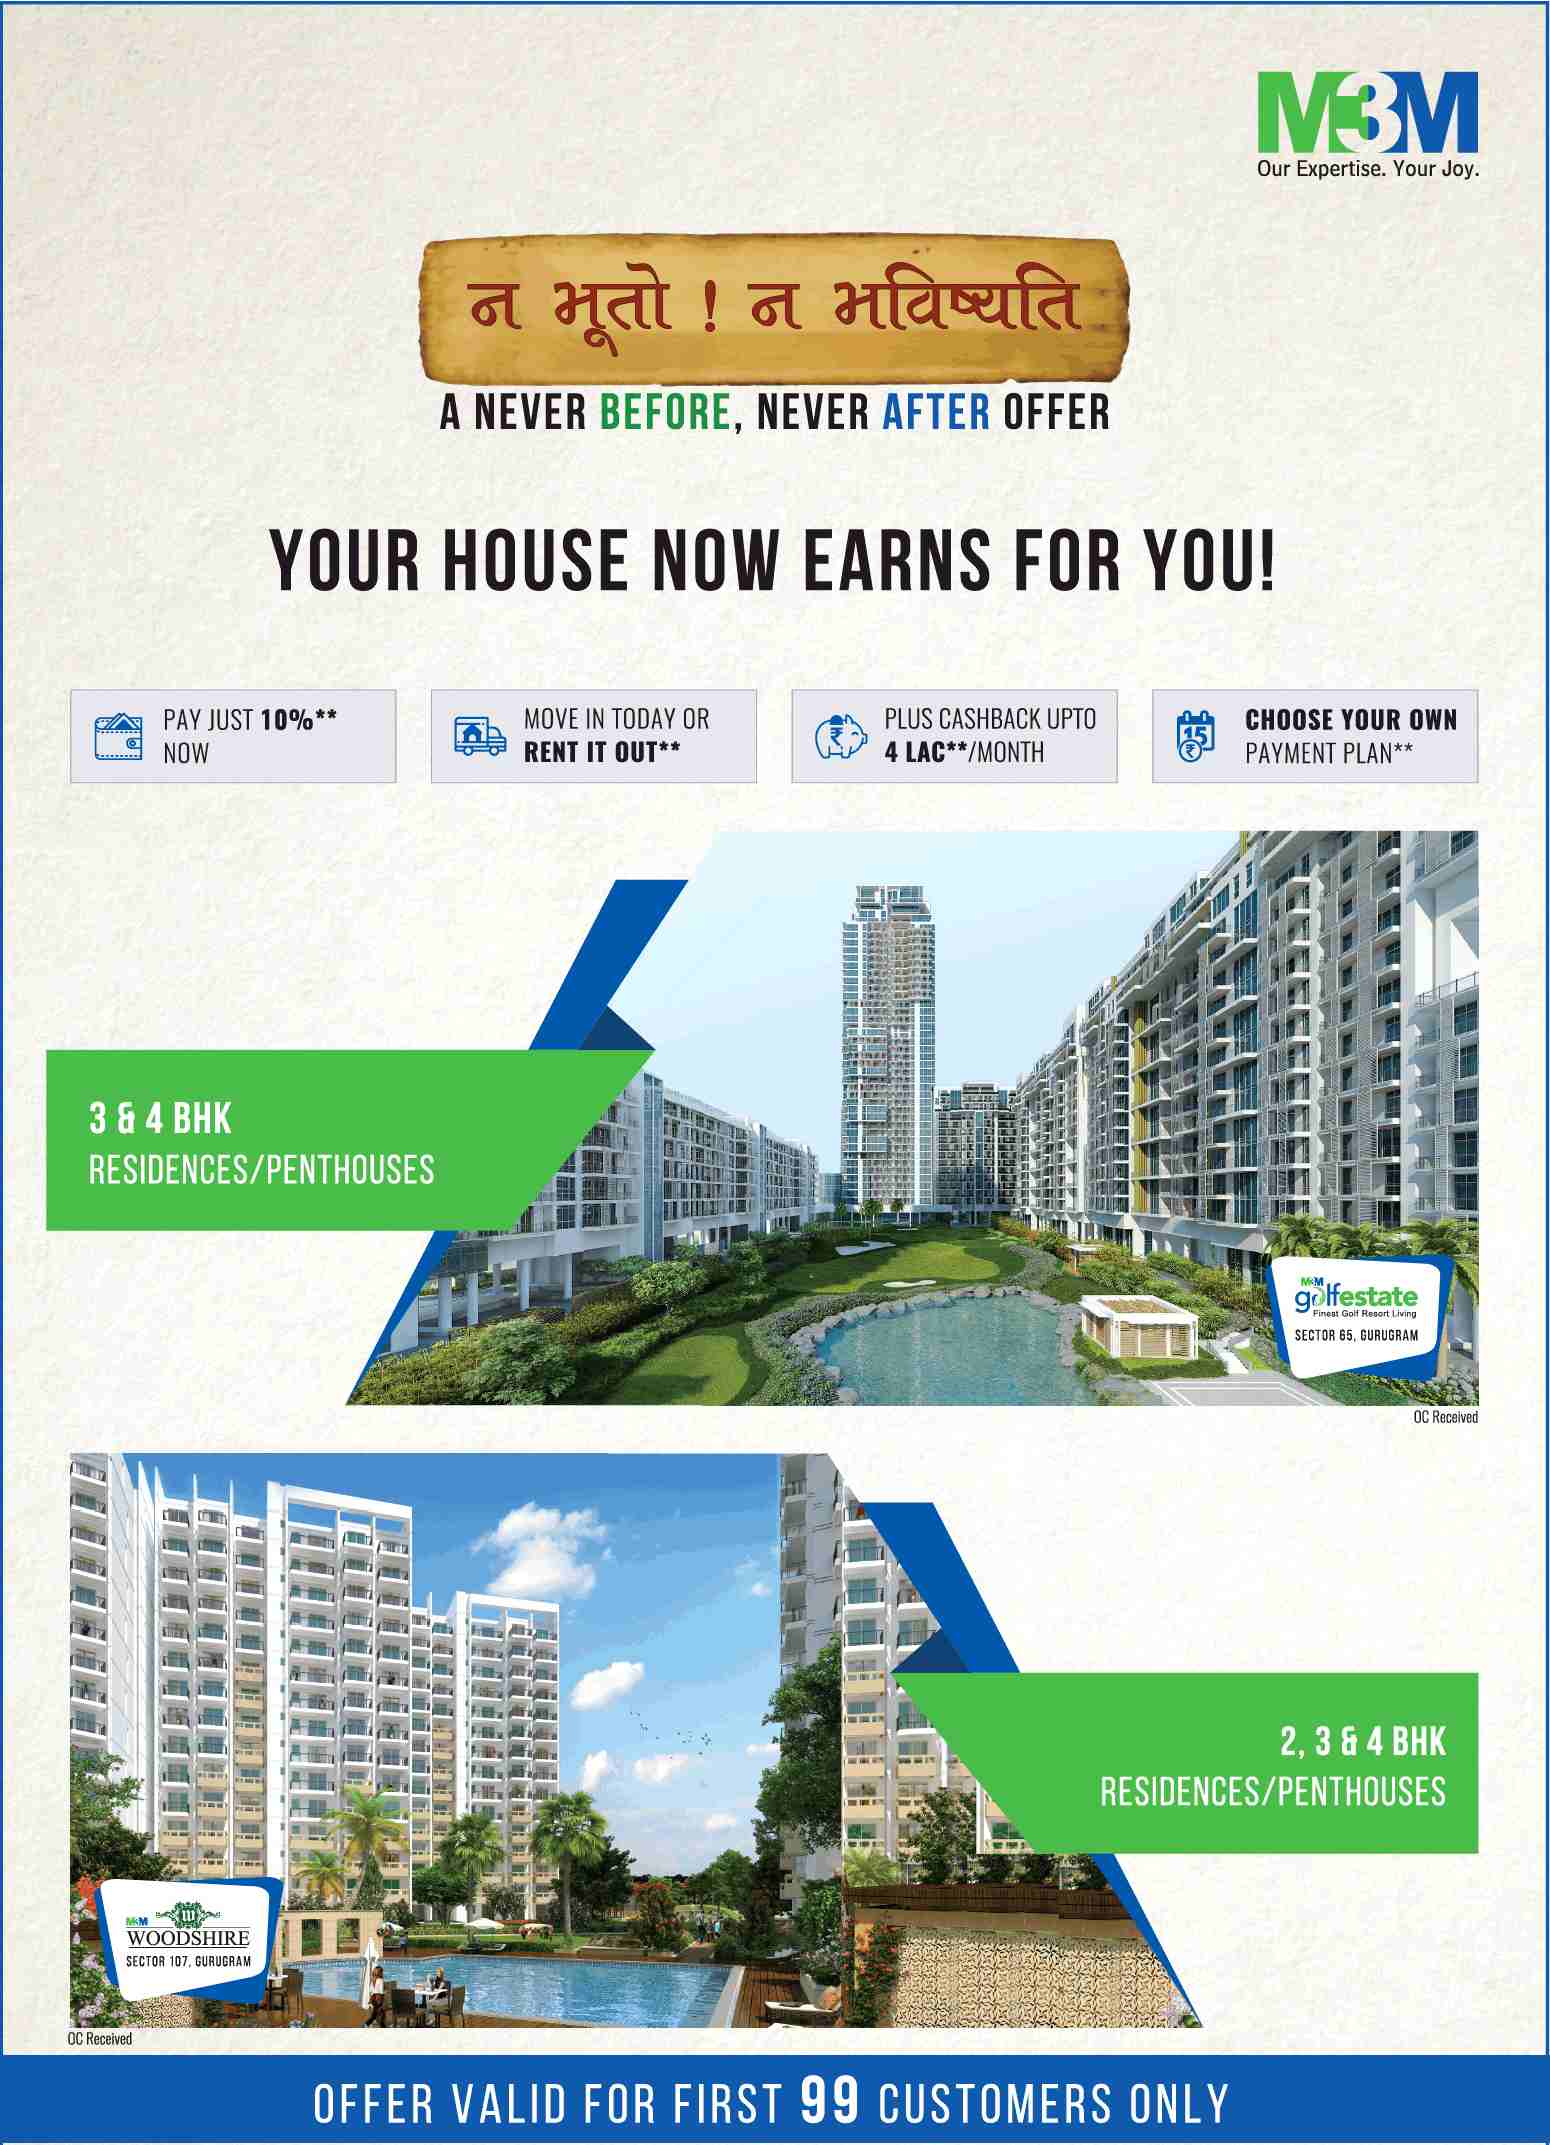 Pay just 10% and move in now & get rent and cashback upto 4 Lakhs a month at M3M projects, Gurgaon Update